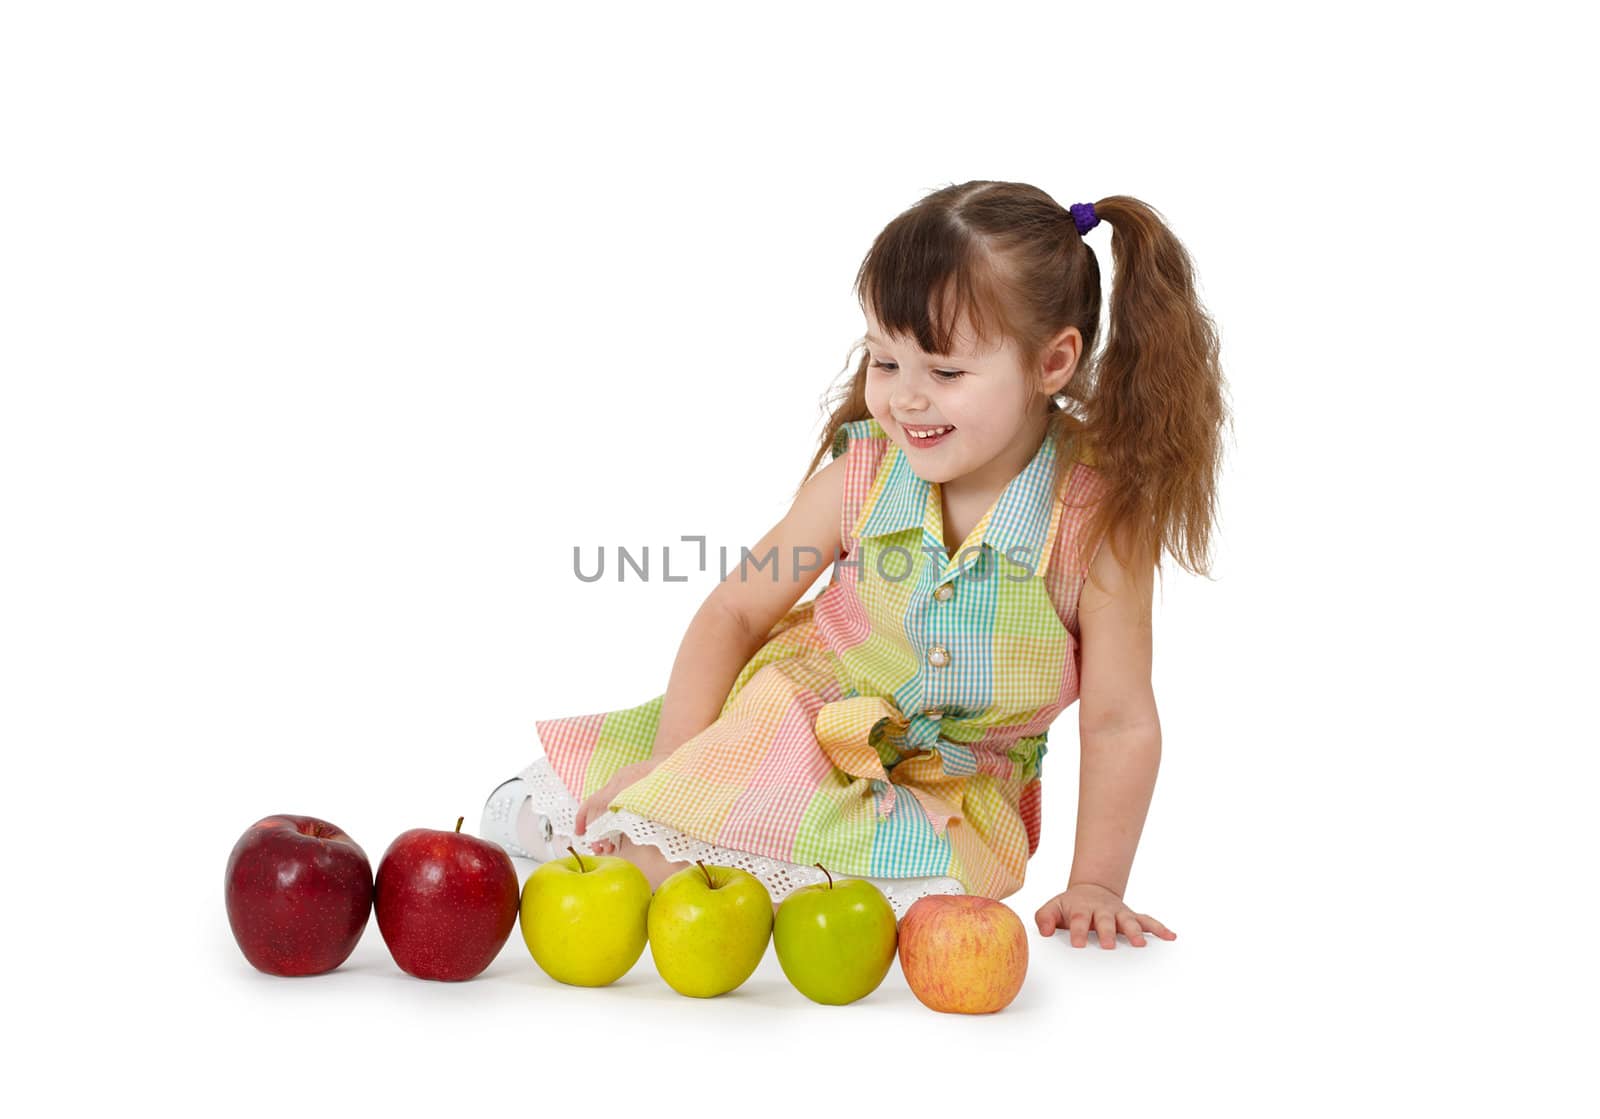 The little girl sits on a white background with apples